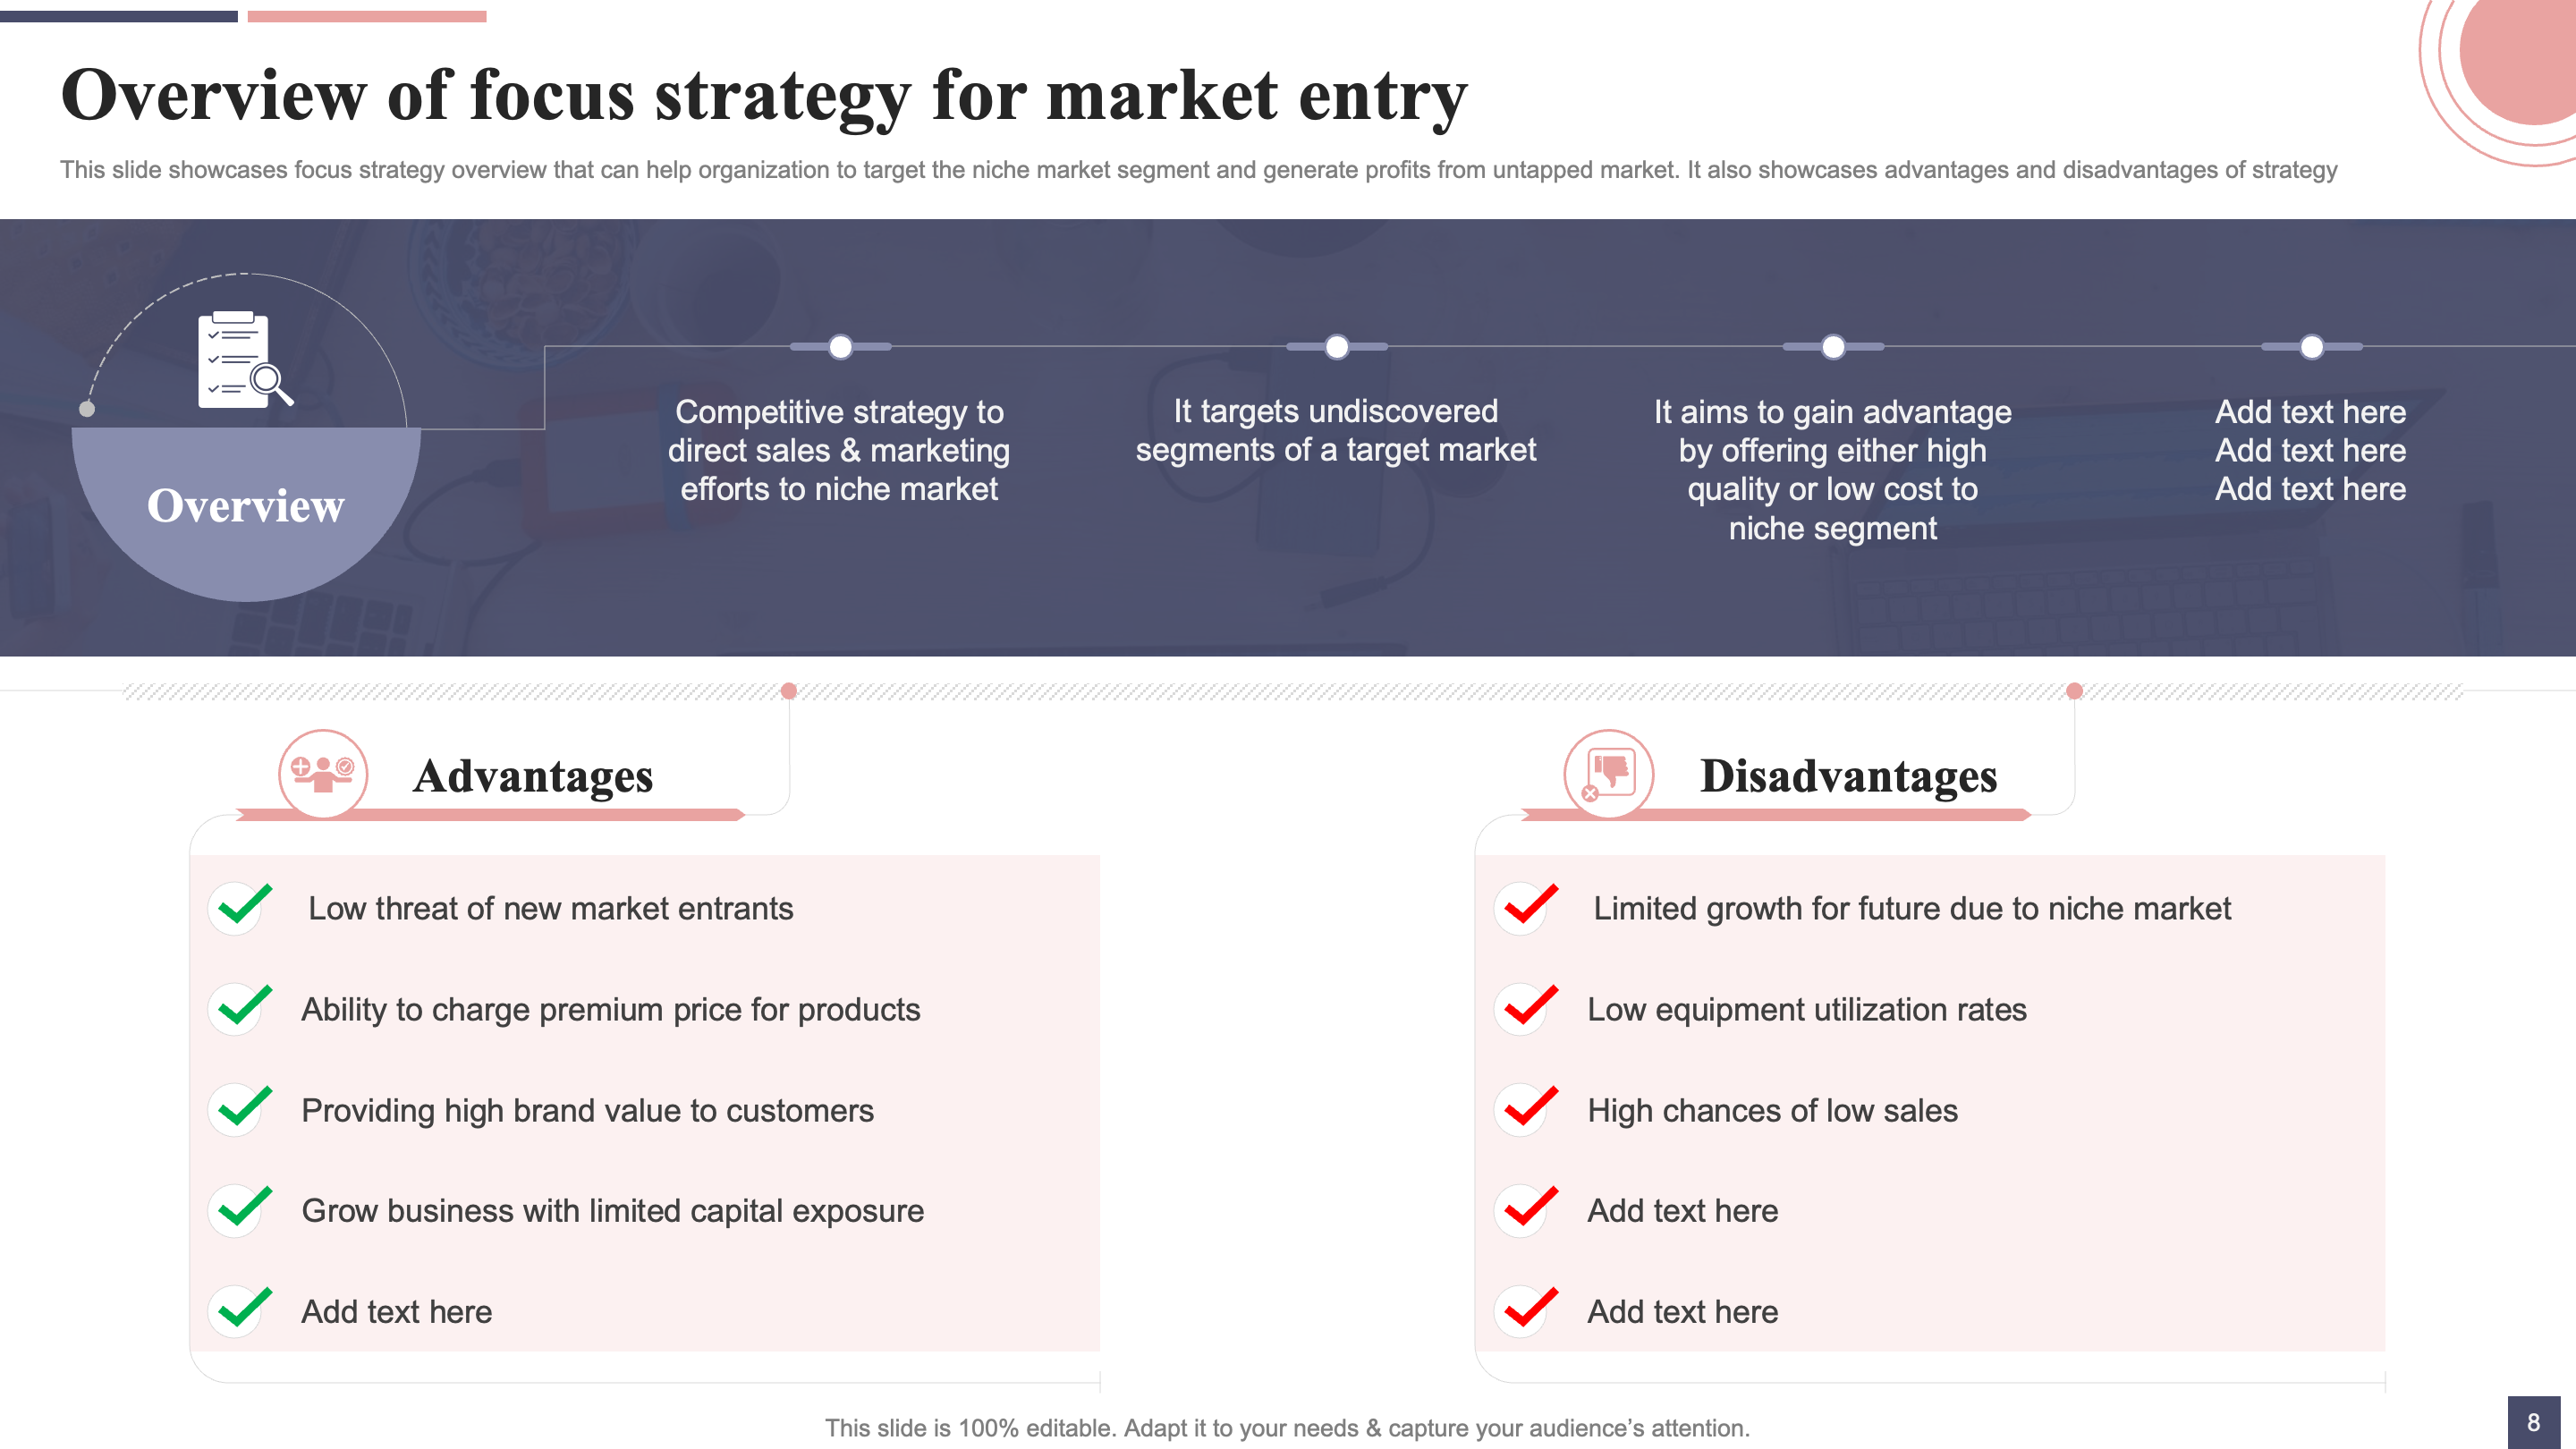 Overview of Focus Strategy for Market Entry 